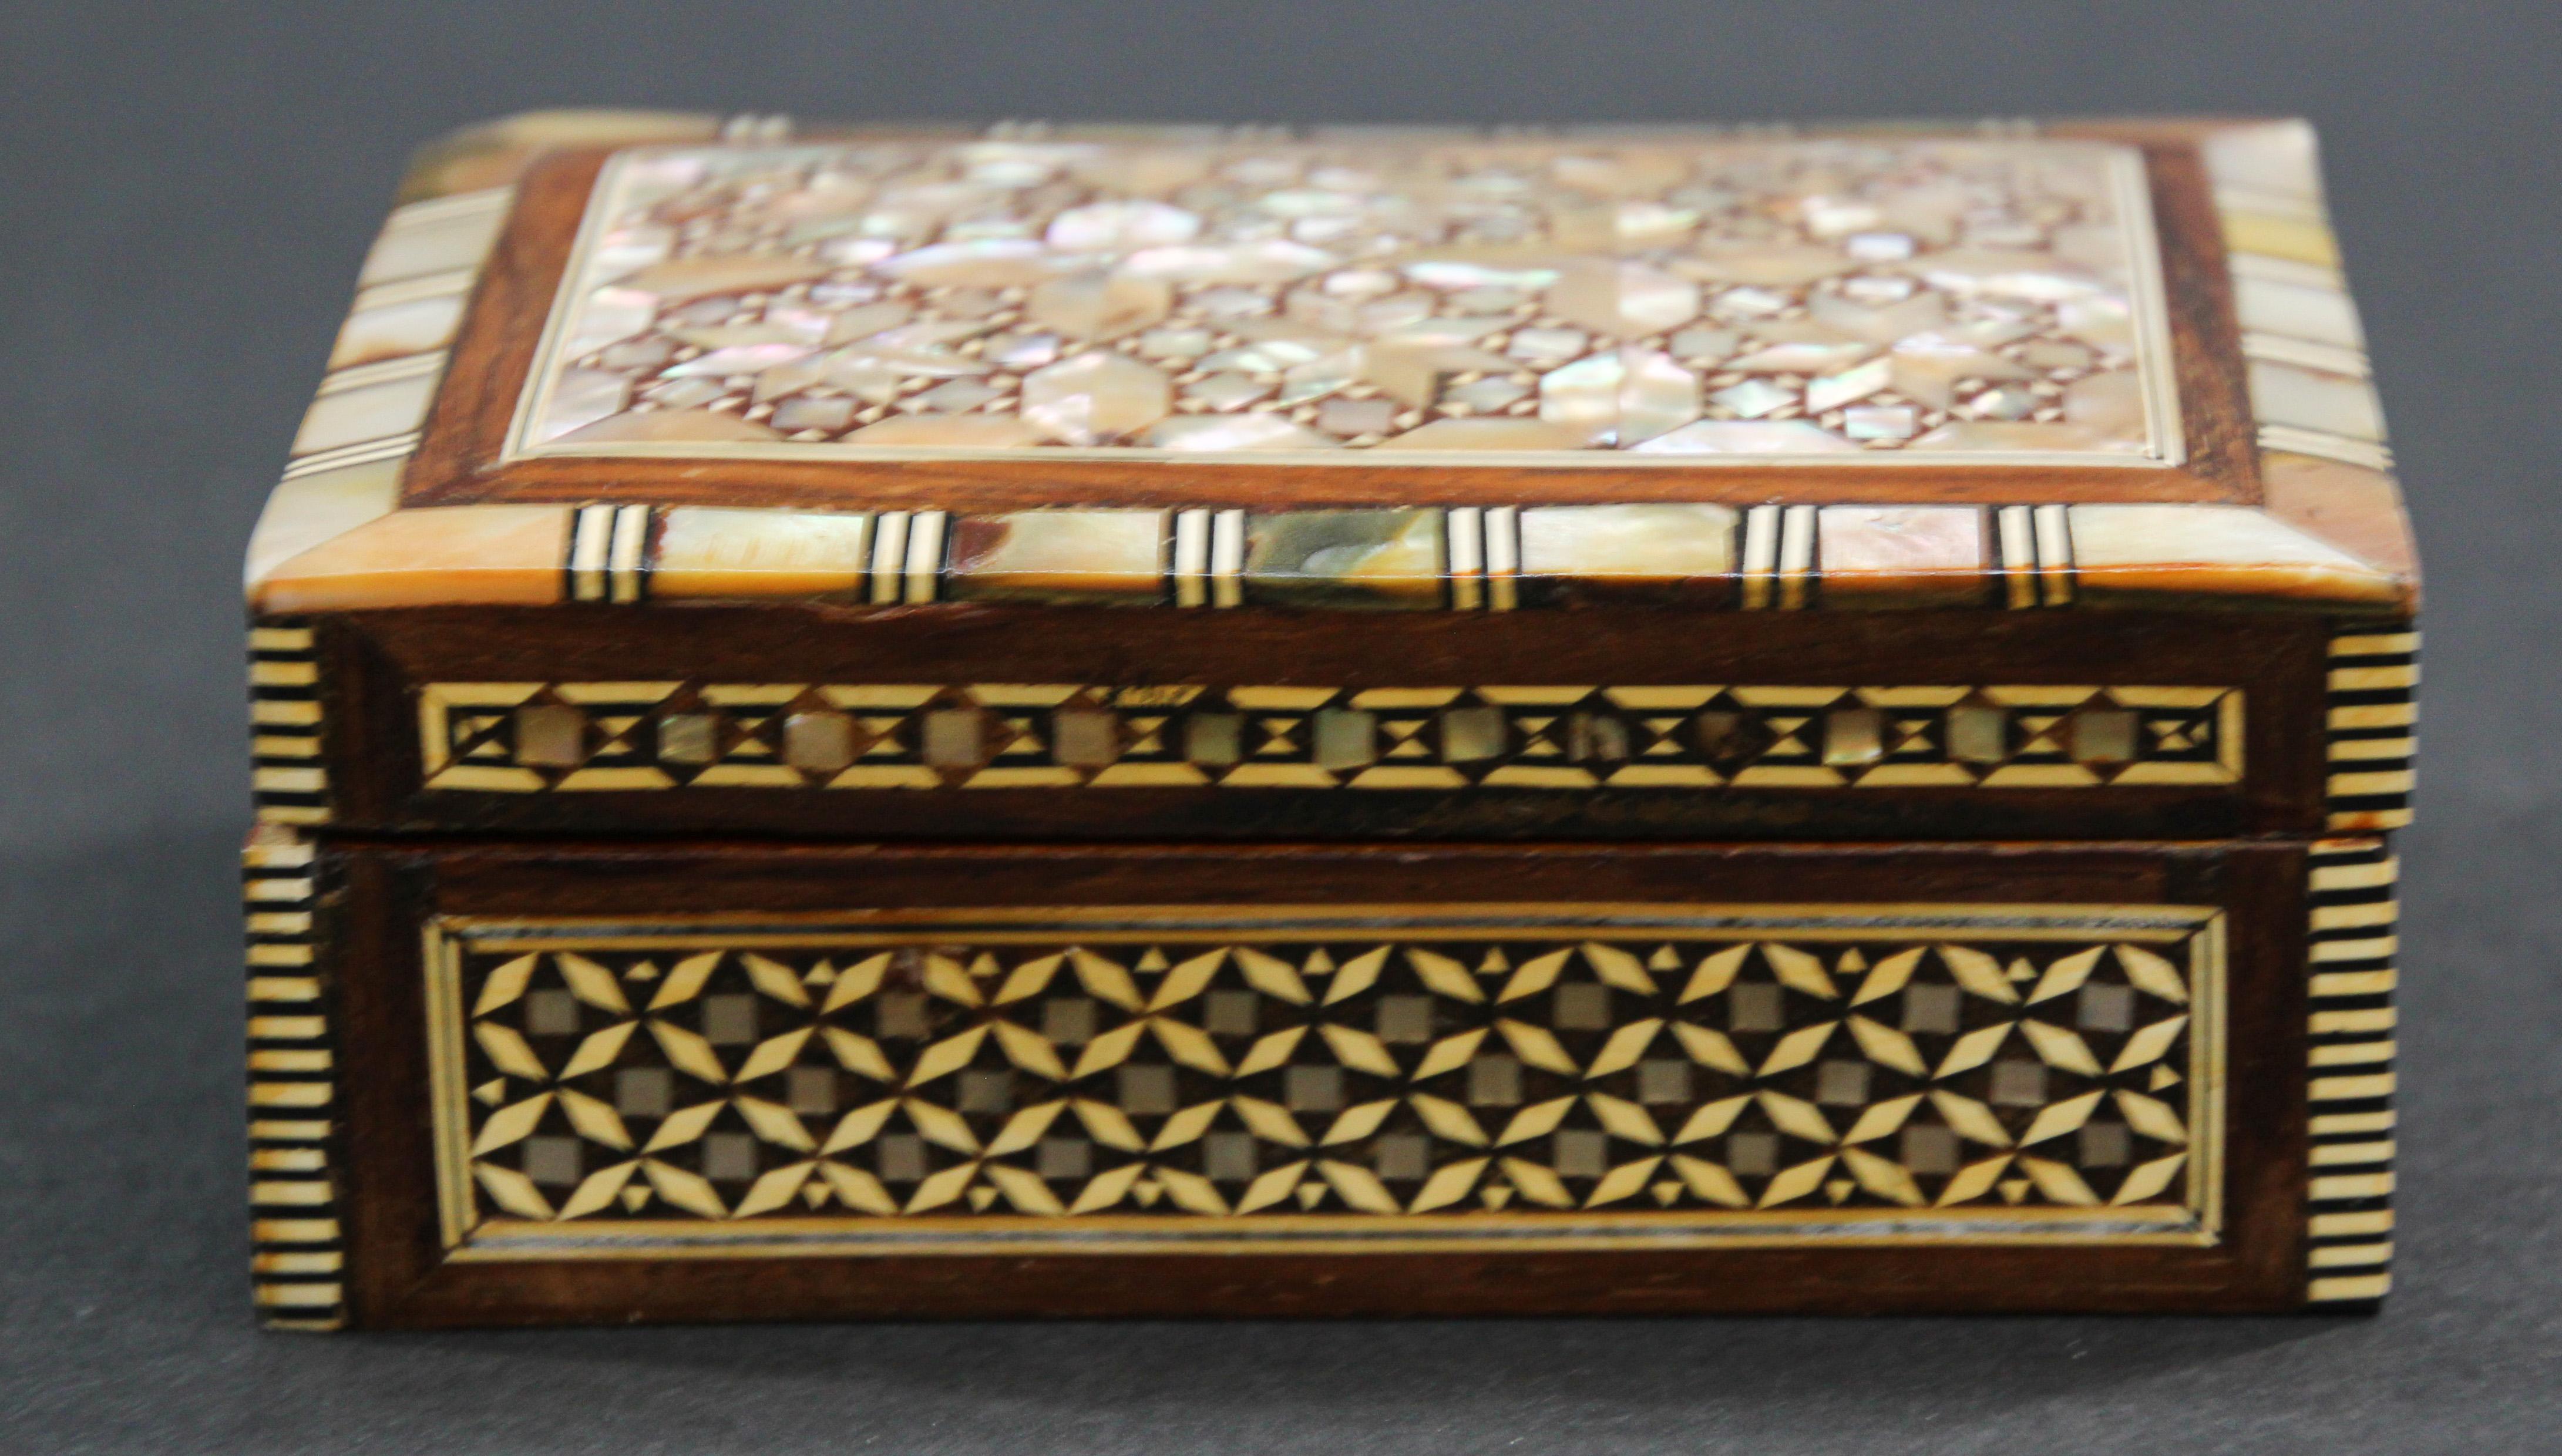 Exquisite handcrafted Middle Eastern Lebanese mosaic marquetry wood box.
Small octagonal walnut Syrian style box intricately decorated with Moorish motif designs which have been painstakingly inlaid with mosaic marquetry and mother of pearl, shell